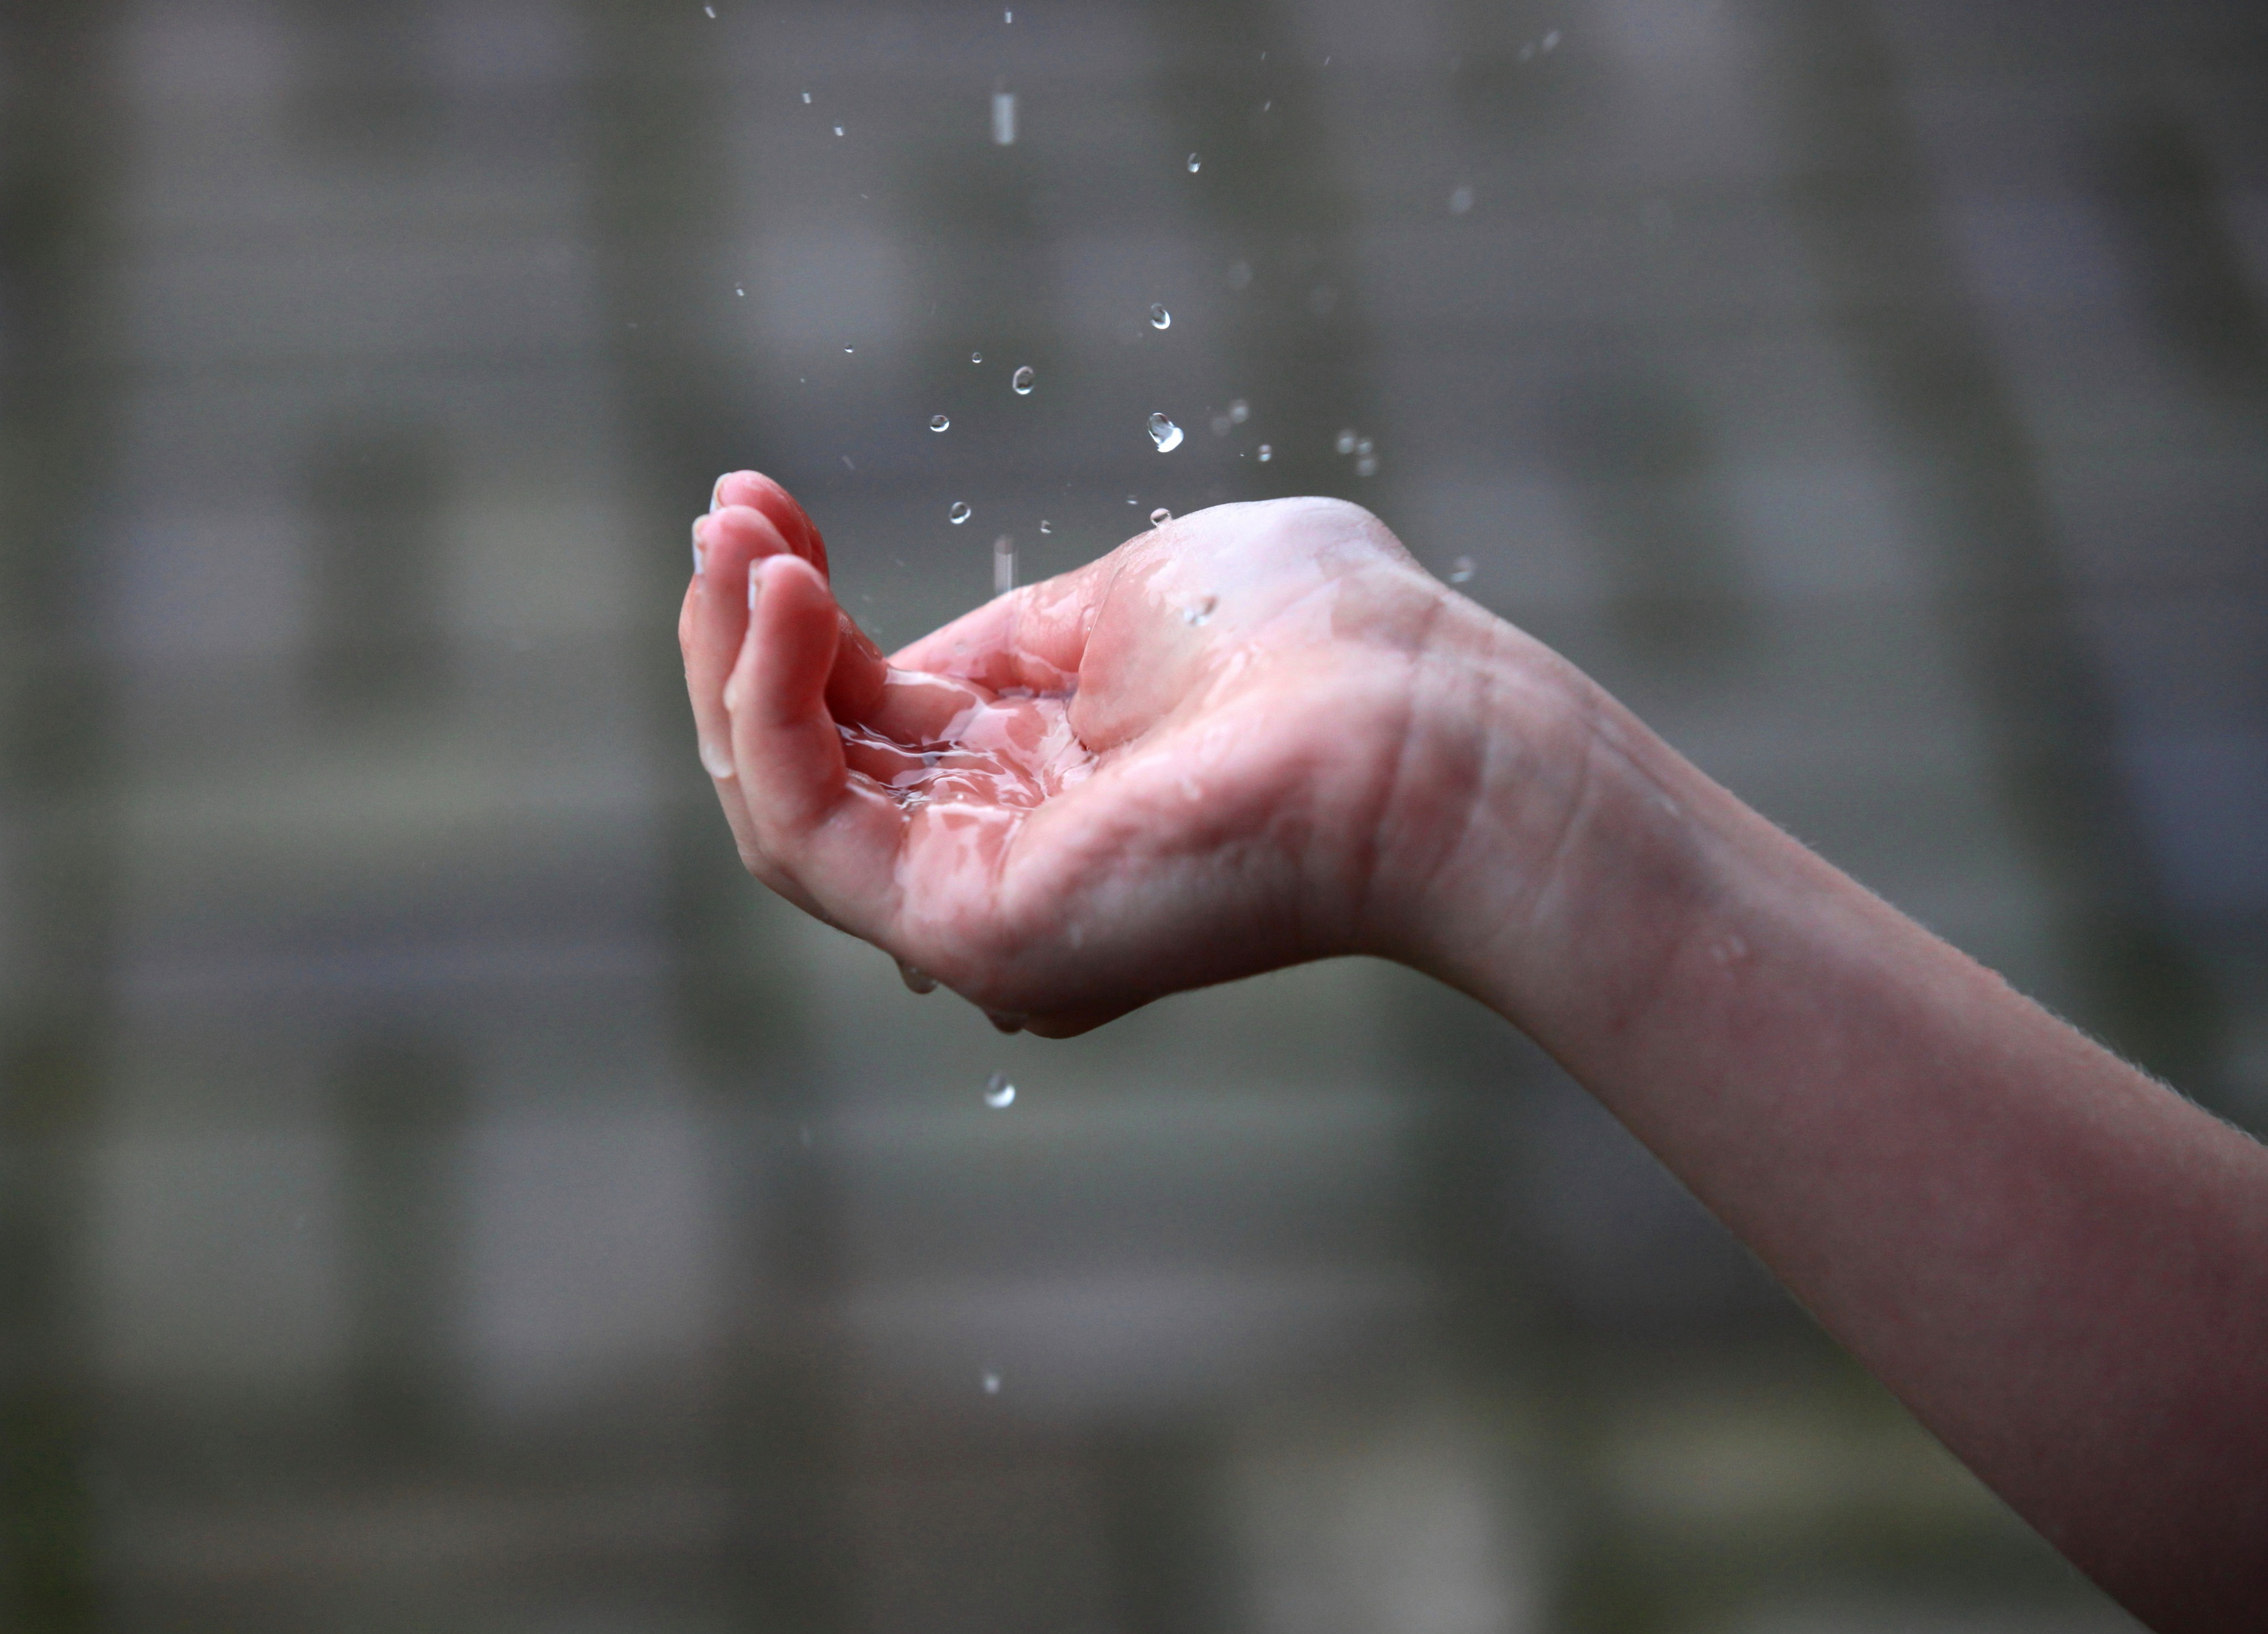 a young girl catching rain water drops with her hand in July 2013